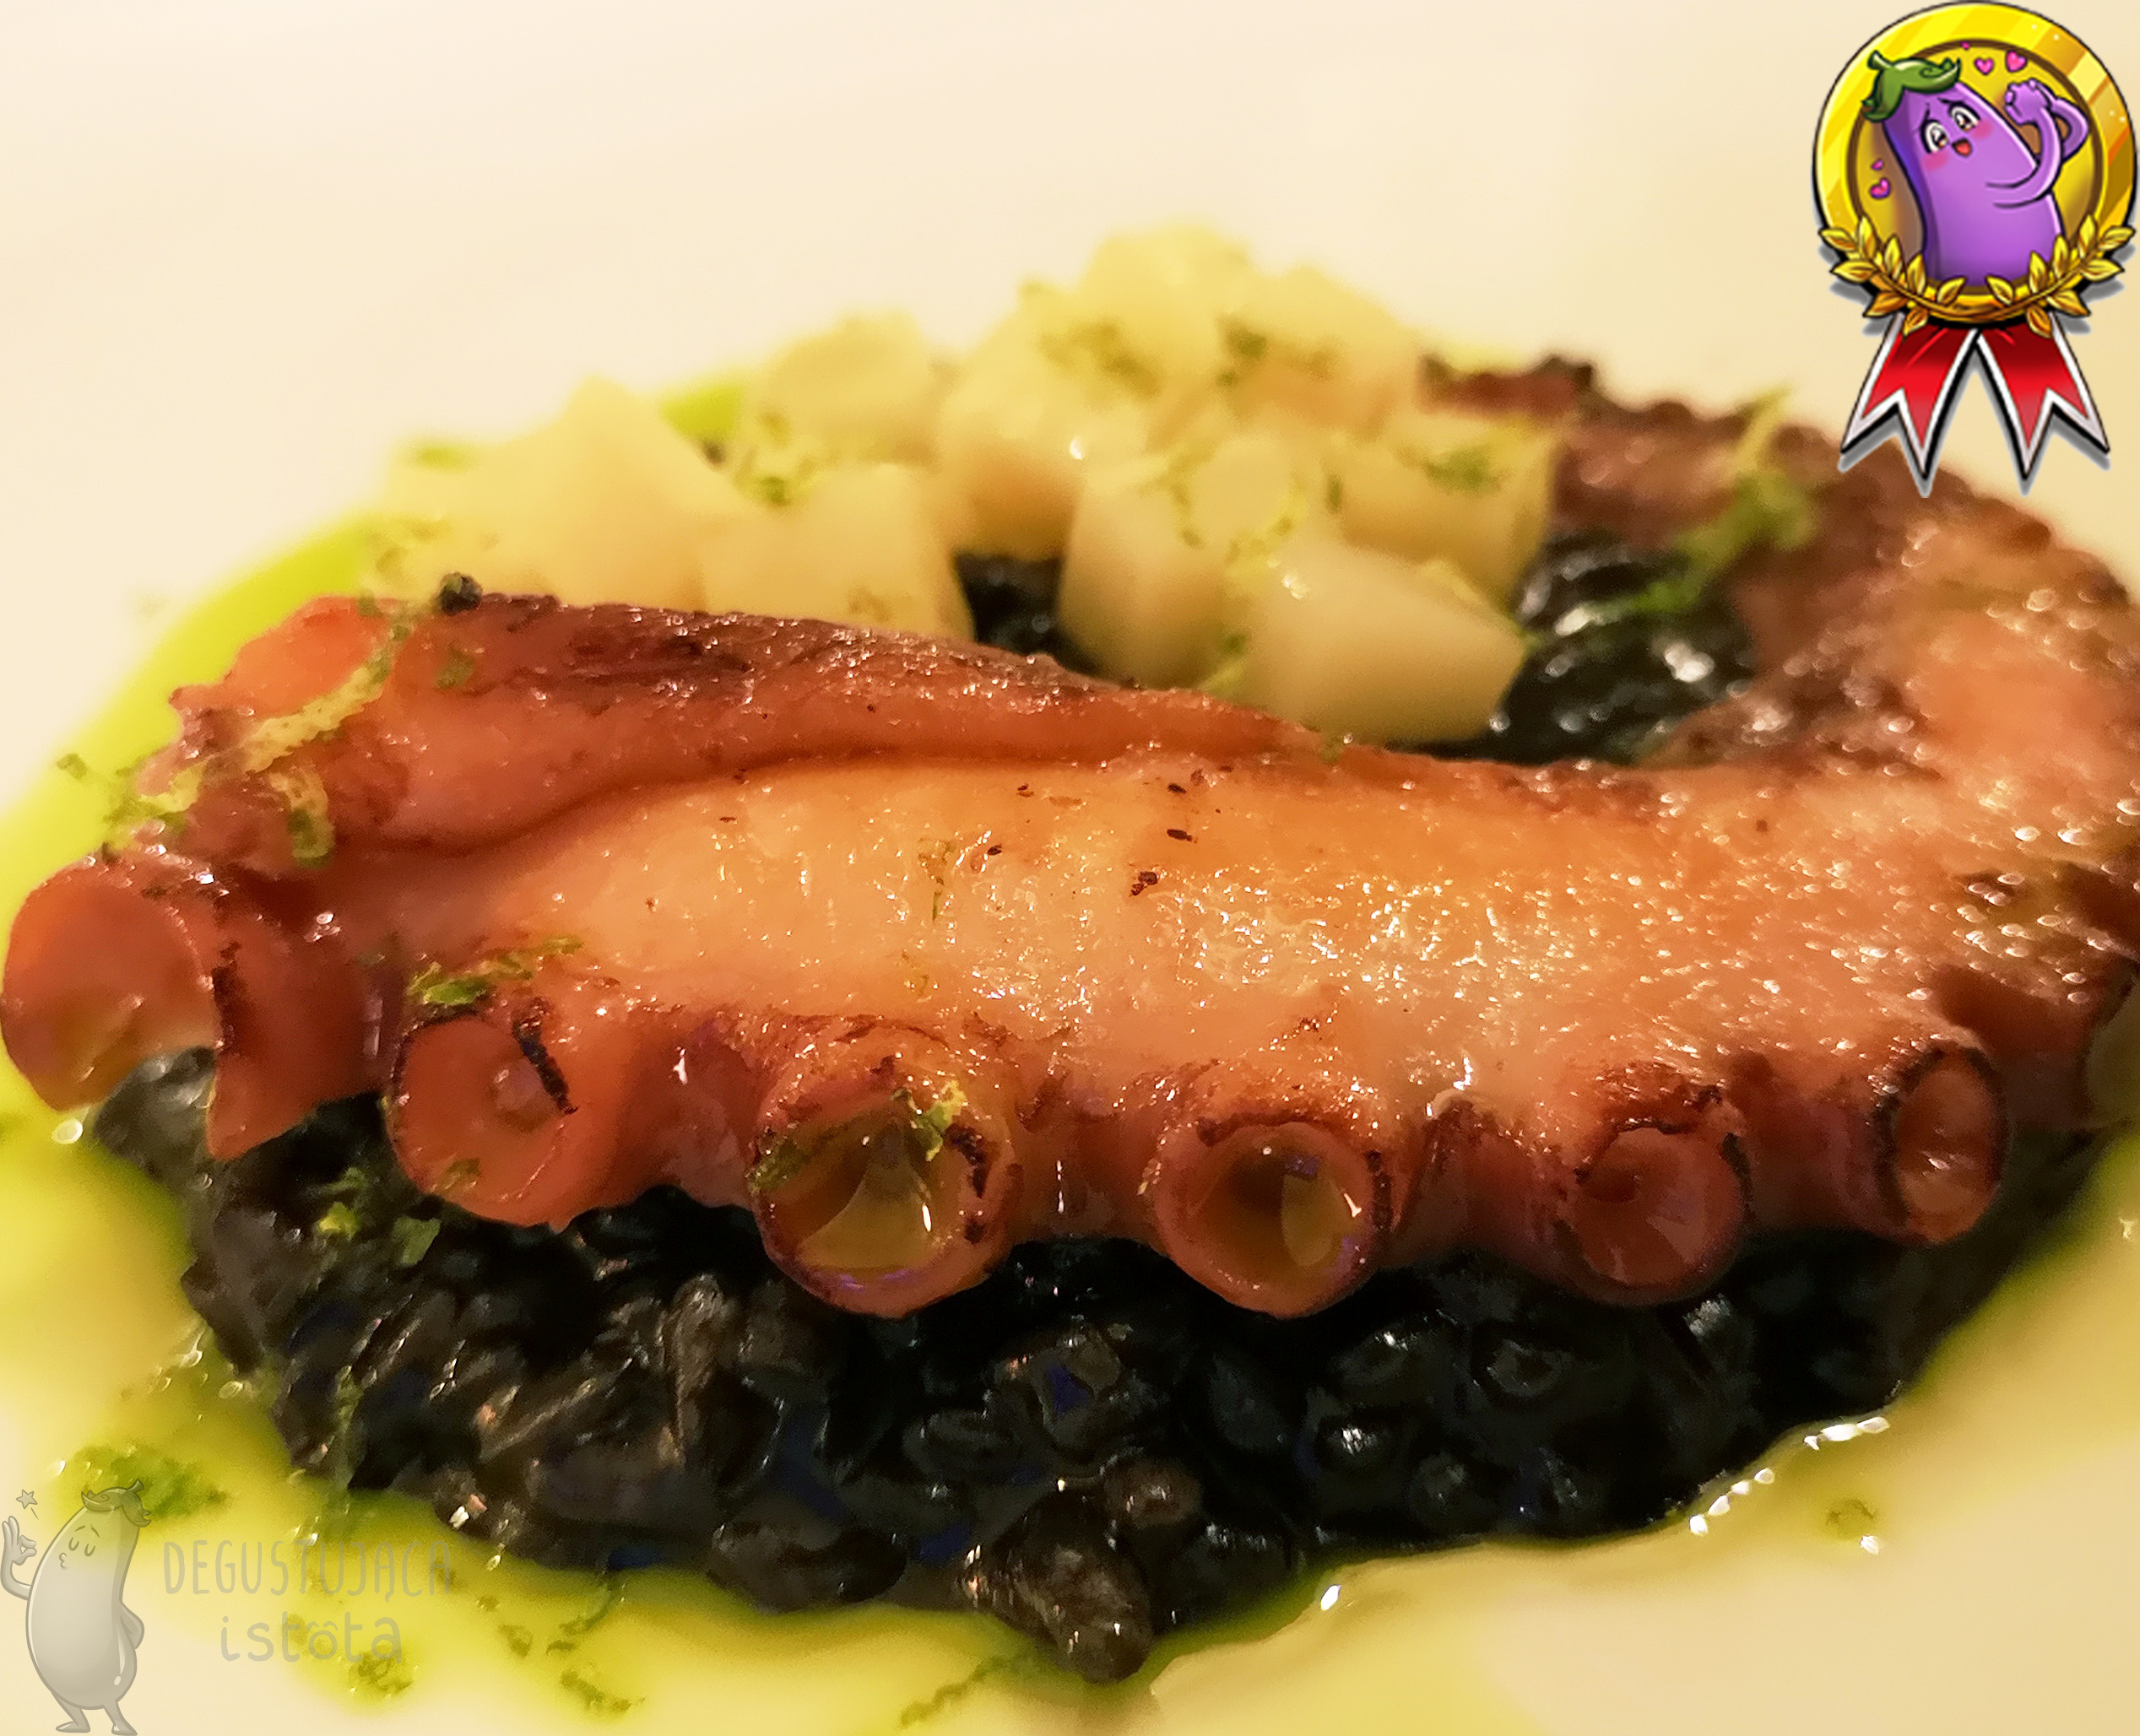 Tentacle of octopus on a black risotto. Around it is green olive oil and diced parsley root.